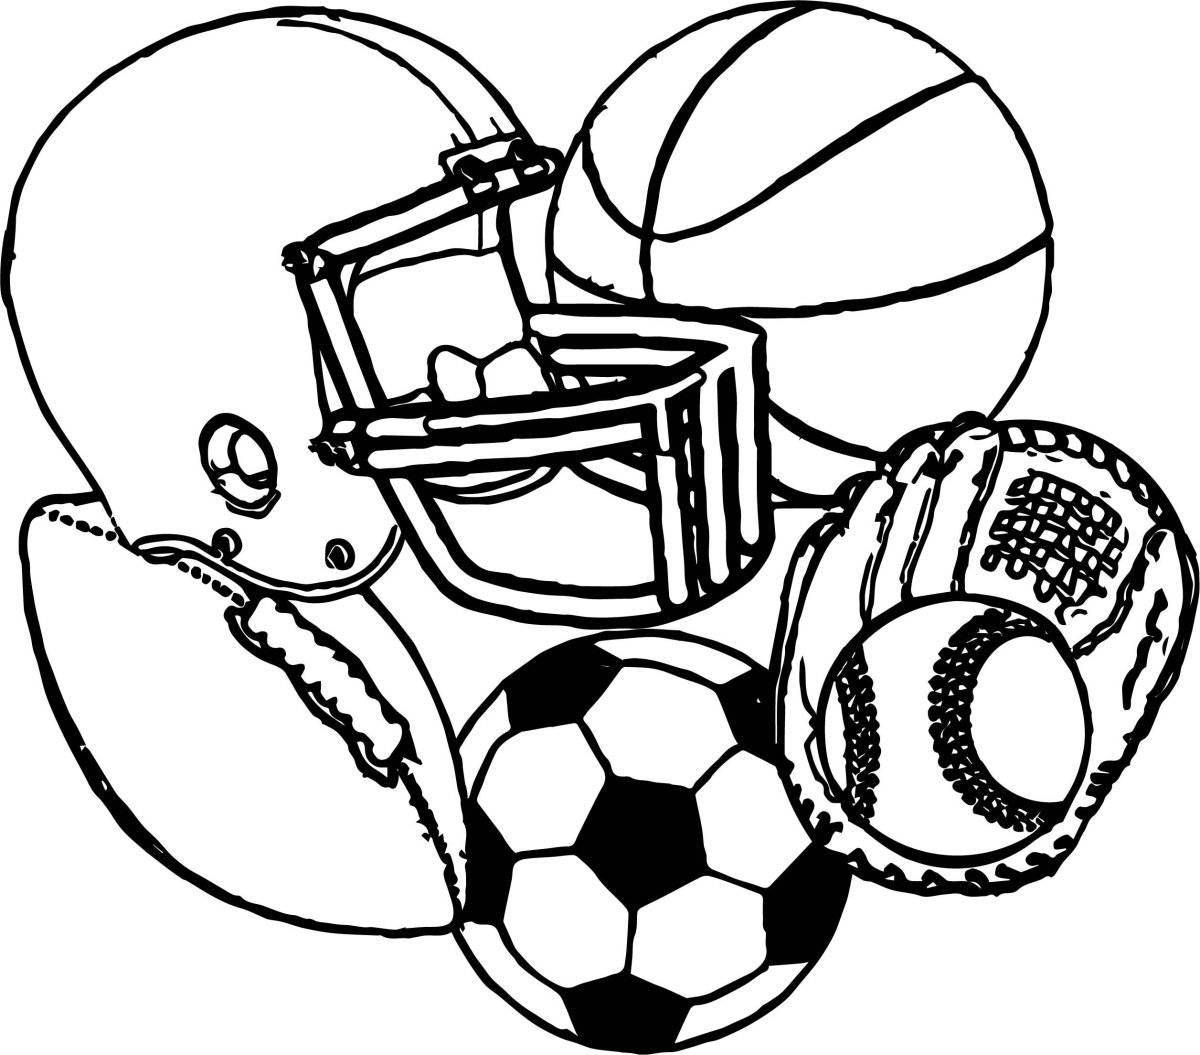 Sports equipment coloring page